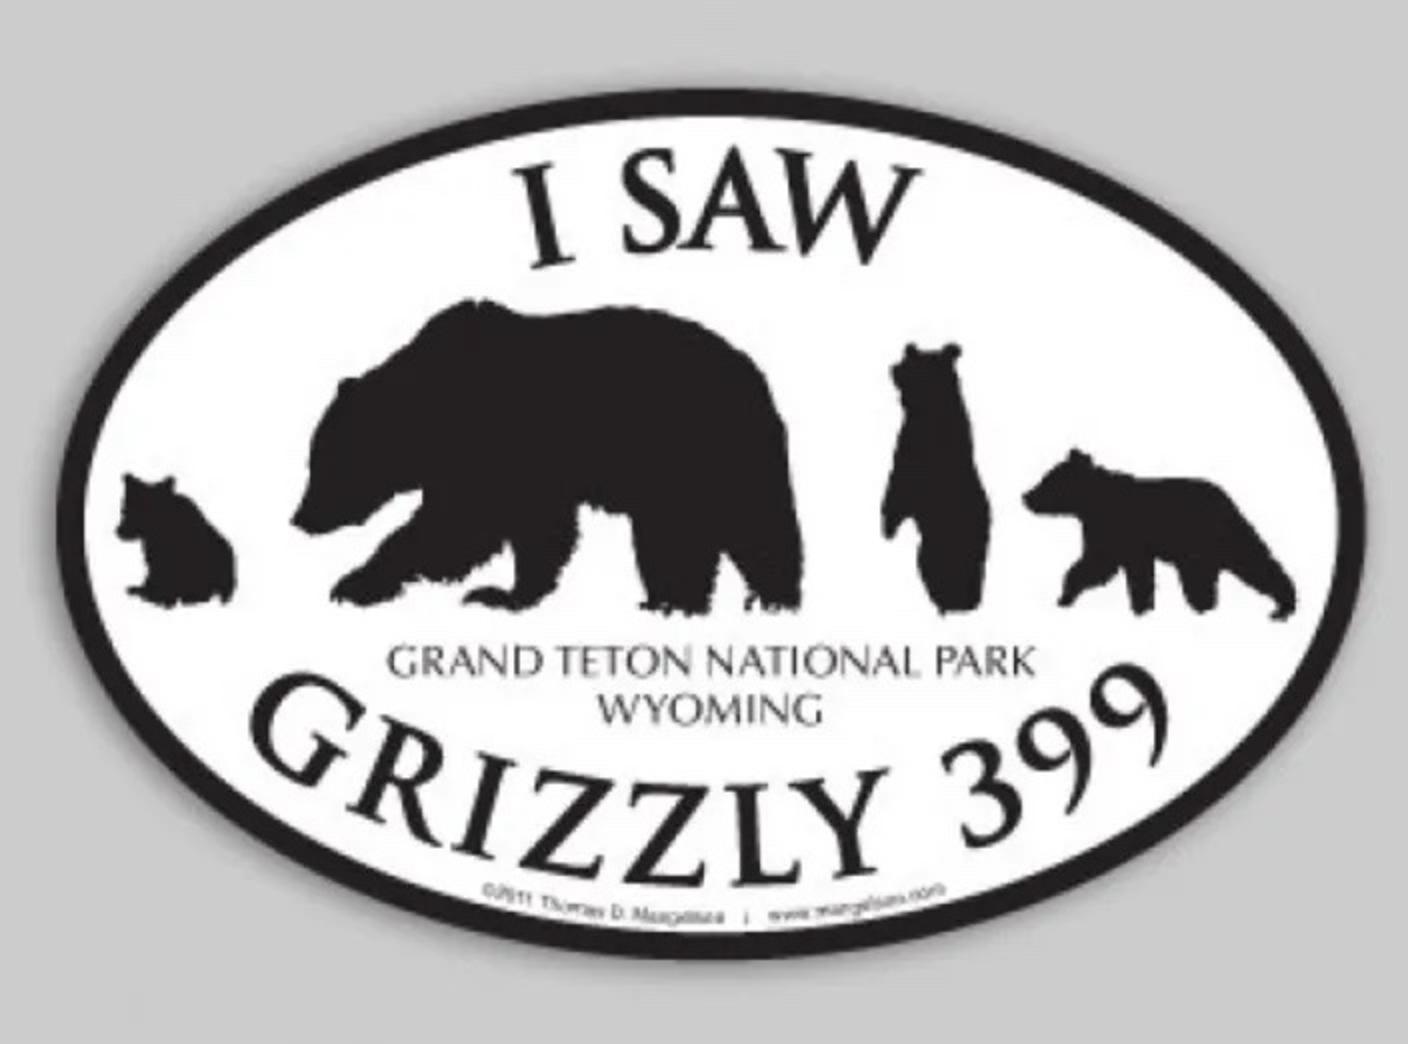 A bumper sticker Mangelsen gives to kids who see Grizzly 399